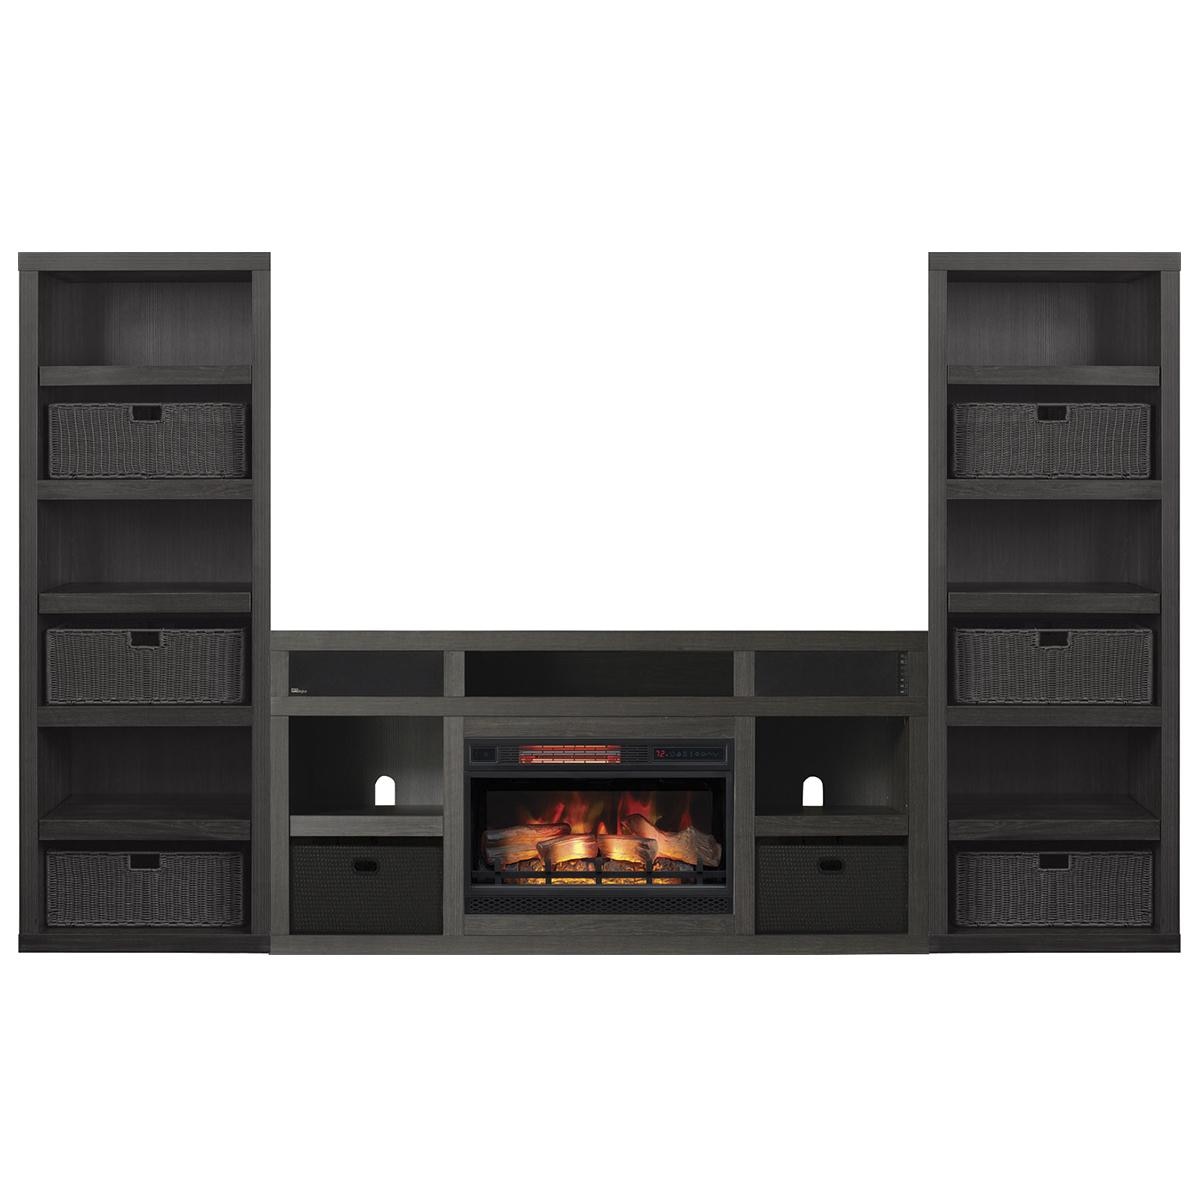 How to Make Fireplace More Efficient Inspirational Fabio Flames Greatlin 3 Piece Fireplace Entertainment Wall